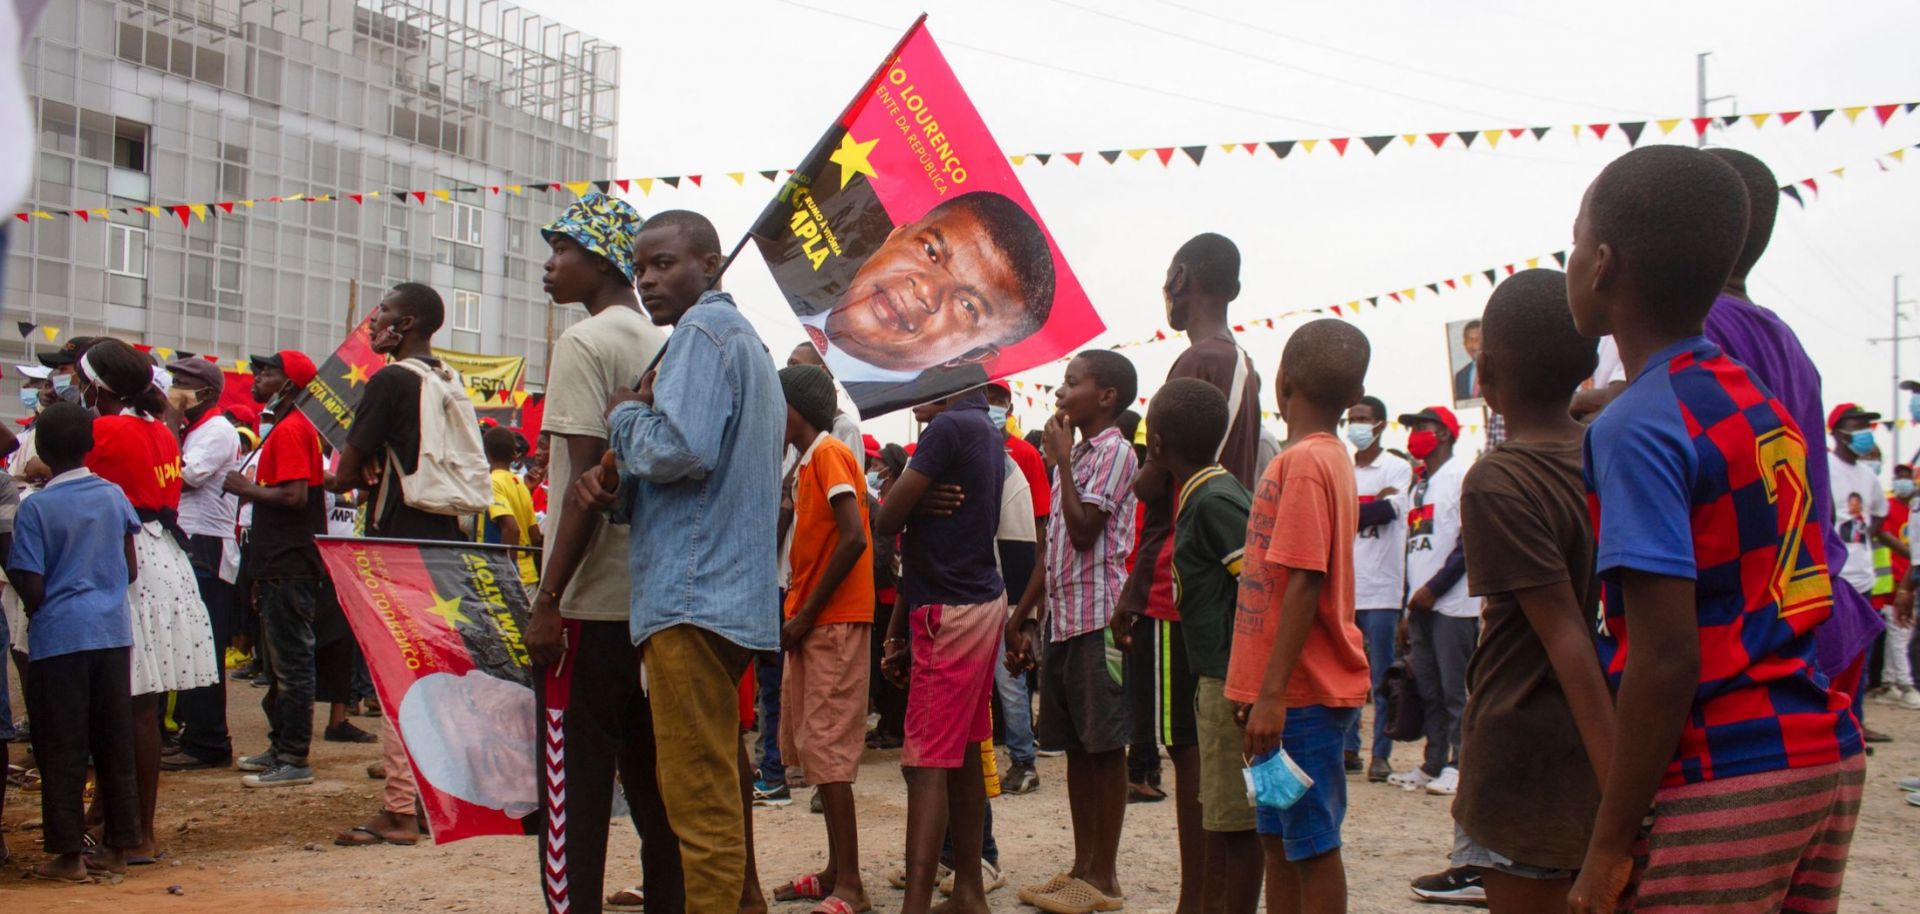 Angolan President Joao Lourenco is pictured on a flag at a campaign rally for the country’s ruling People's Movement for the Liberation of Angola (MPLA) party on June 26, 2021, at Largo das Escolas in Luanda. 